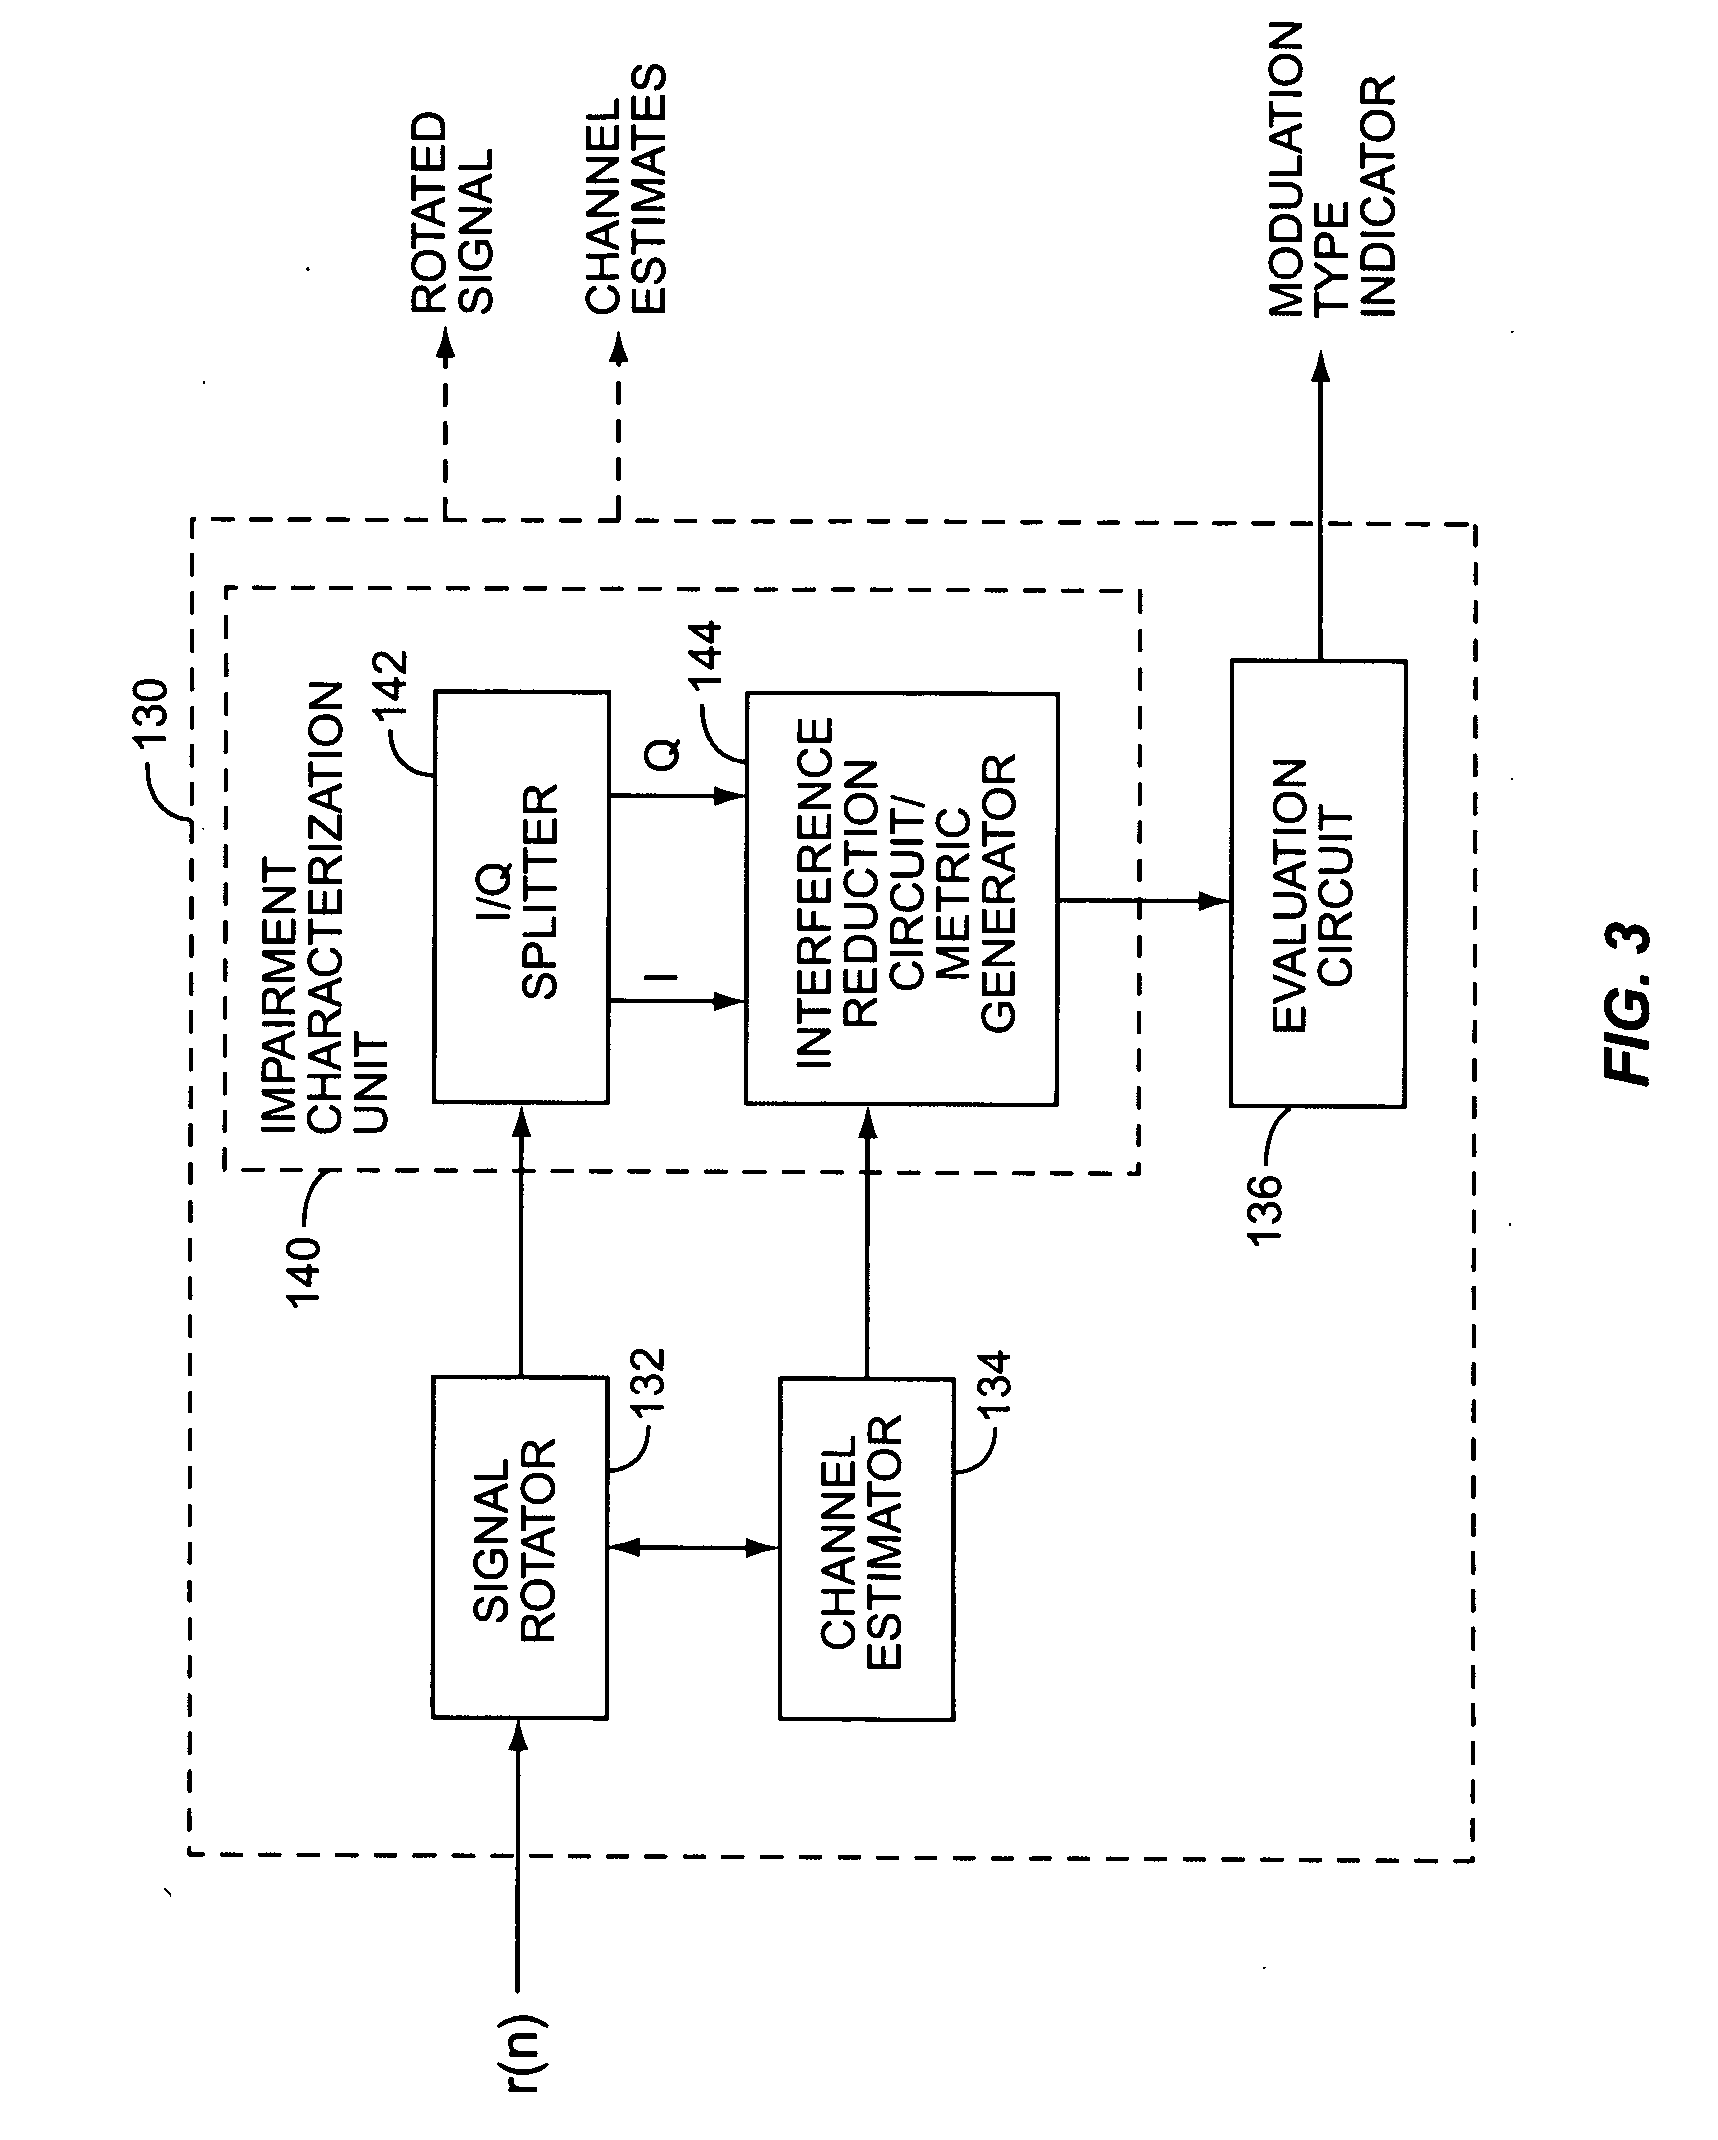 Method and apparatus for interference cancellation in communication signal processing